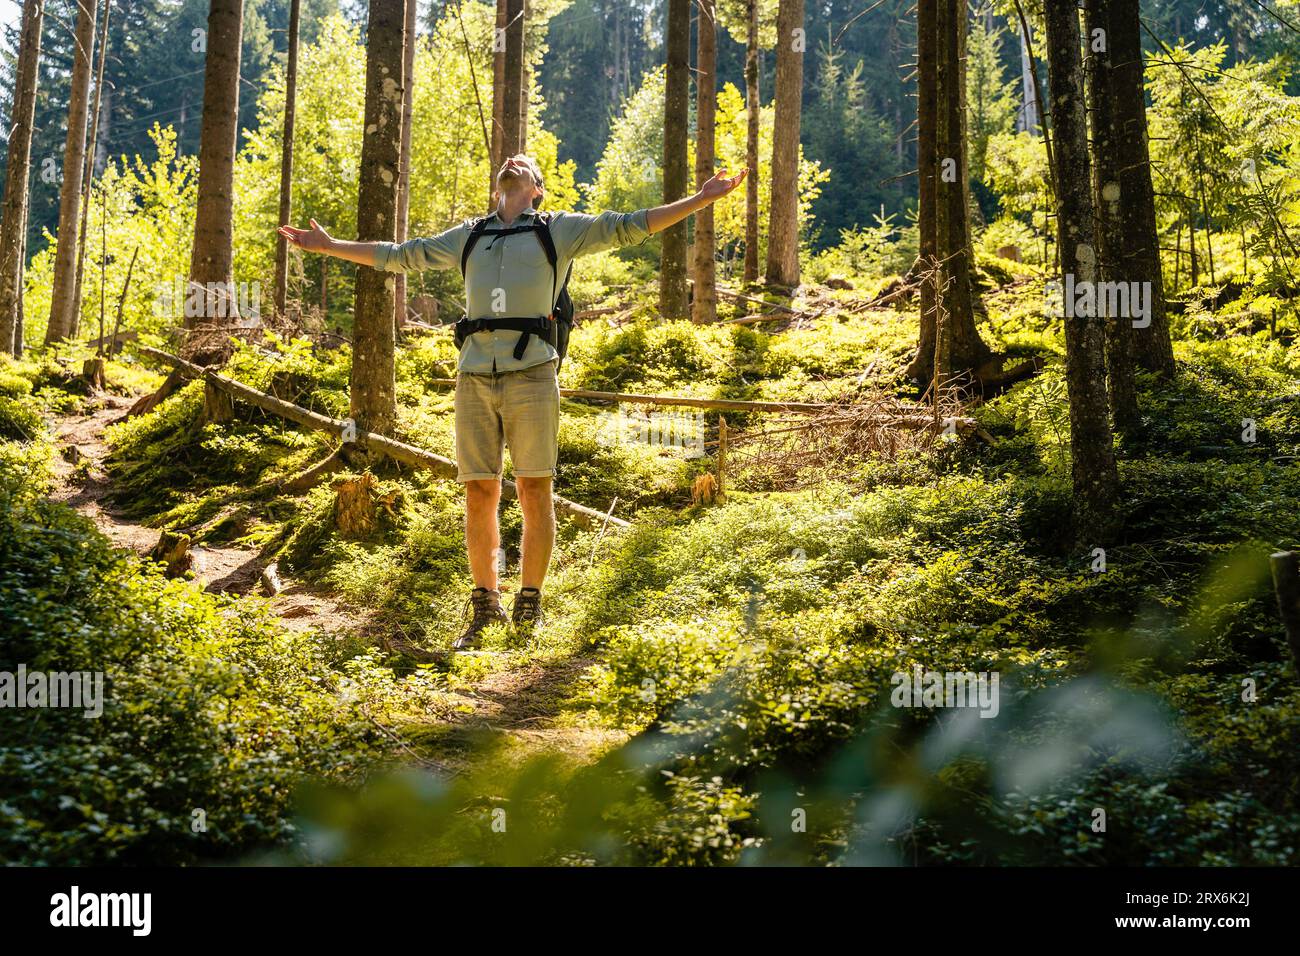 Man with arms outstretched standing in forest Stock Photo